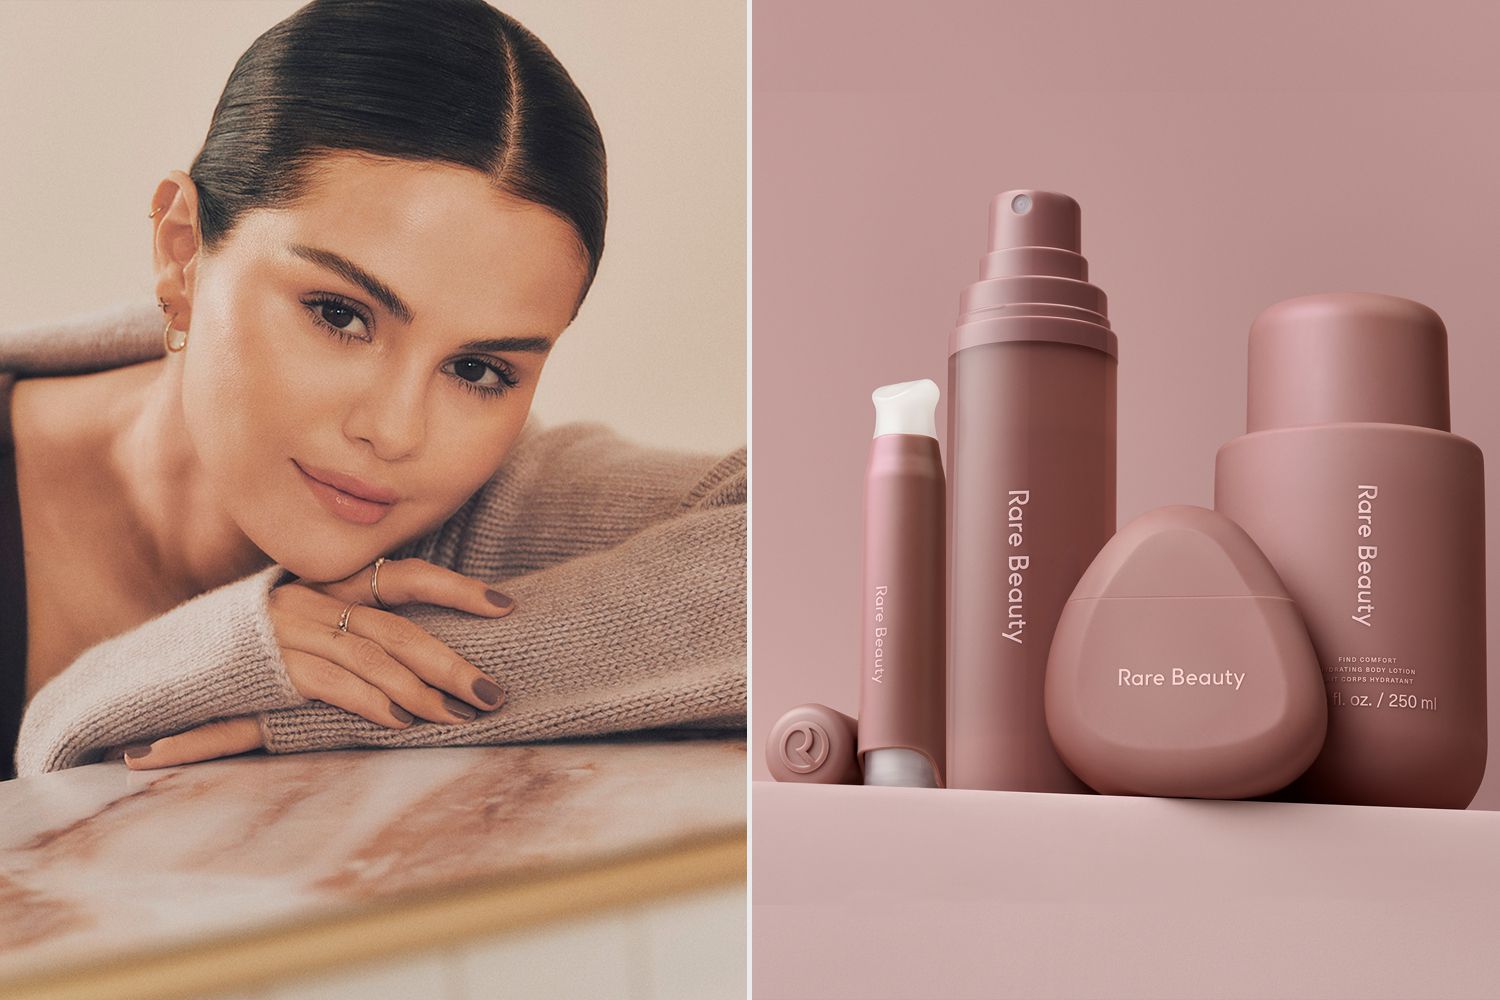 Selena Gomez's Rare Beauty Launches New Body Care Line That Offers "Comfort" During Tough Times
